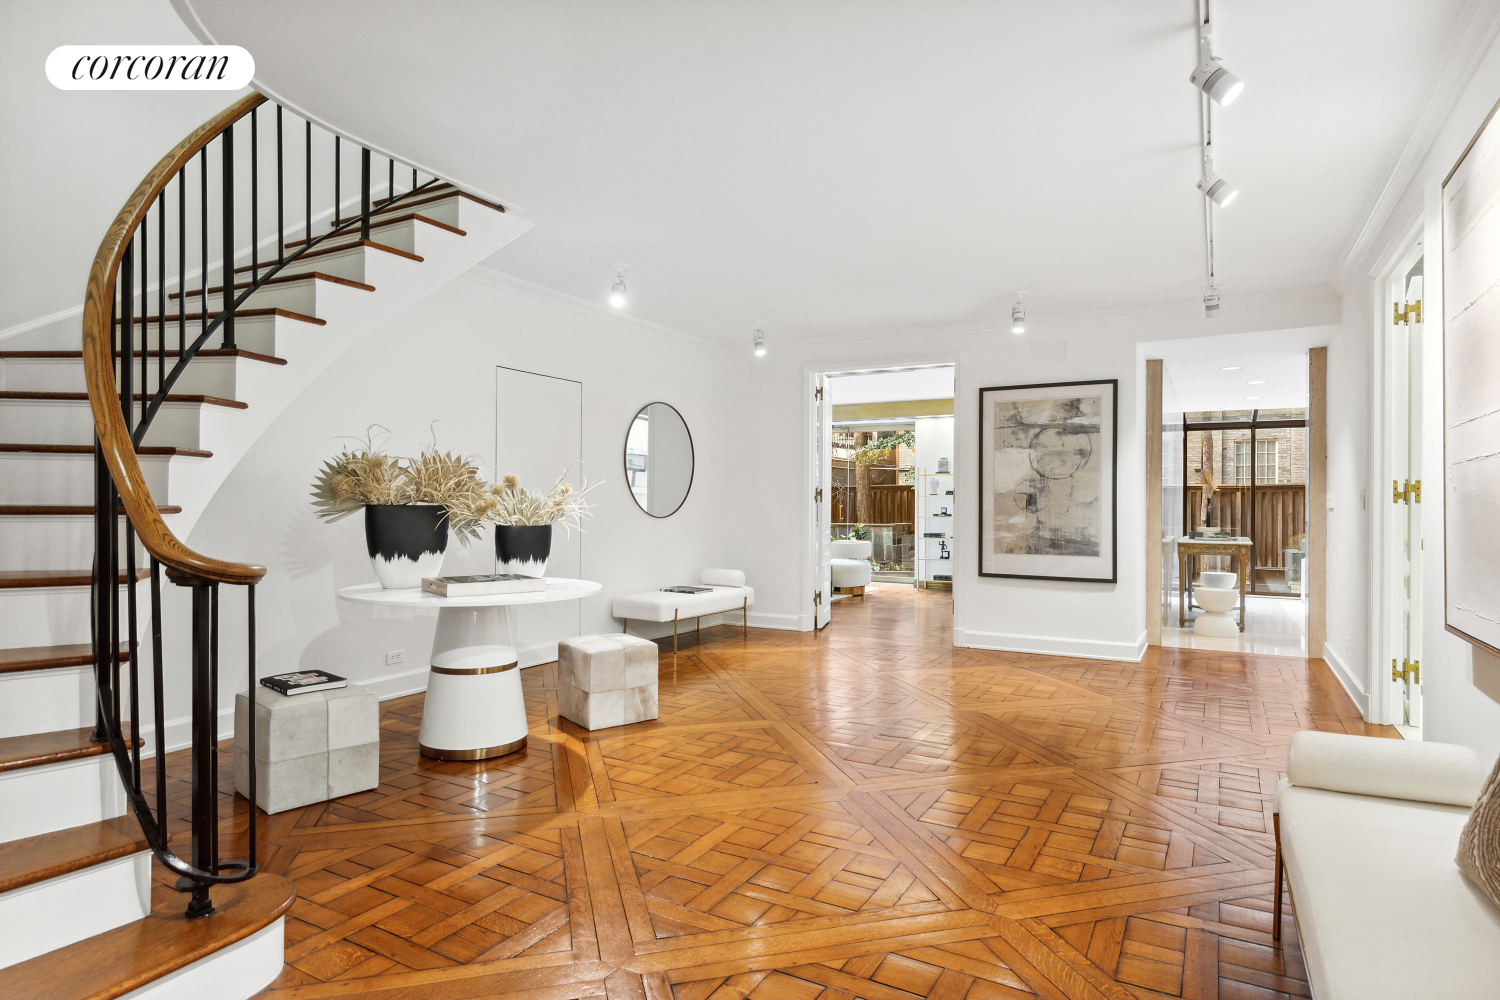 812 5th Avenue Maisonsout, Lenox Hill, Upper East Side, NYC - 5 Bedrooms  
4.5 Bathrooms  
9 Rooms - 